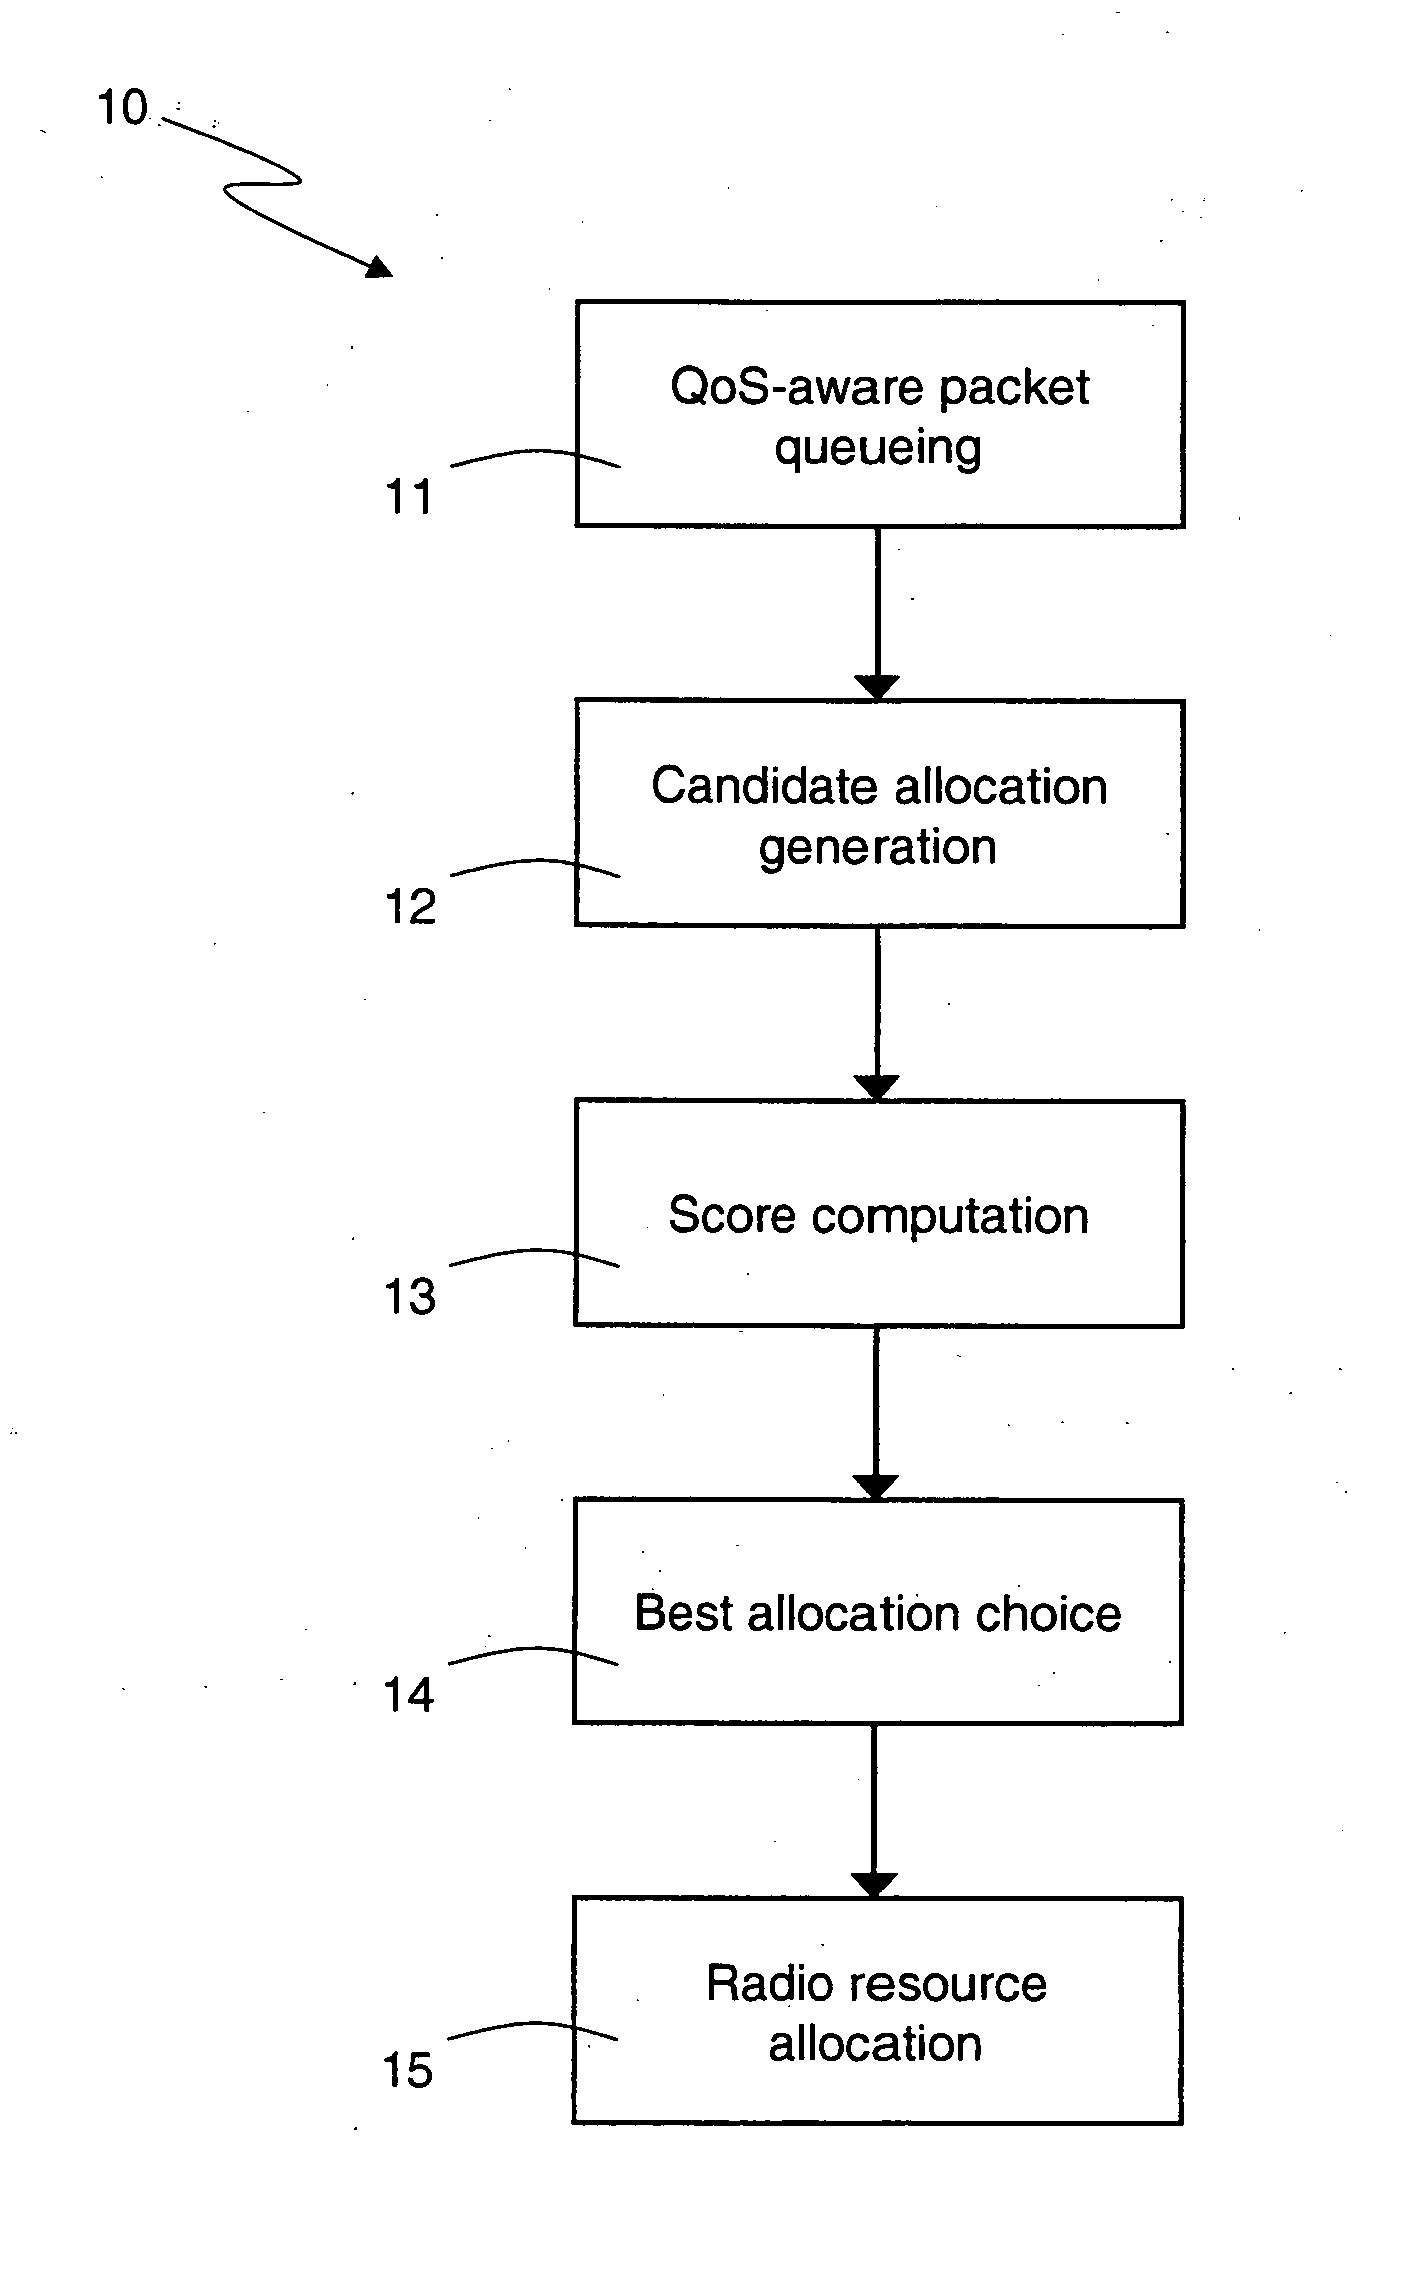 Radio resource scheduling for intra-system interference coordination in wireless communication systems